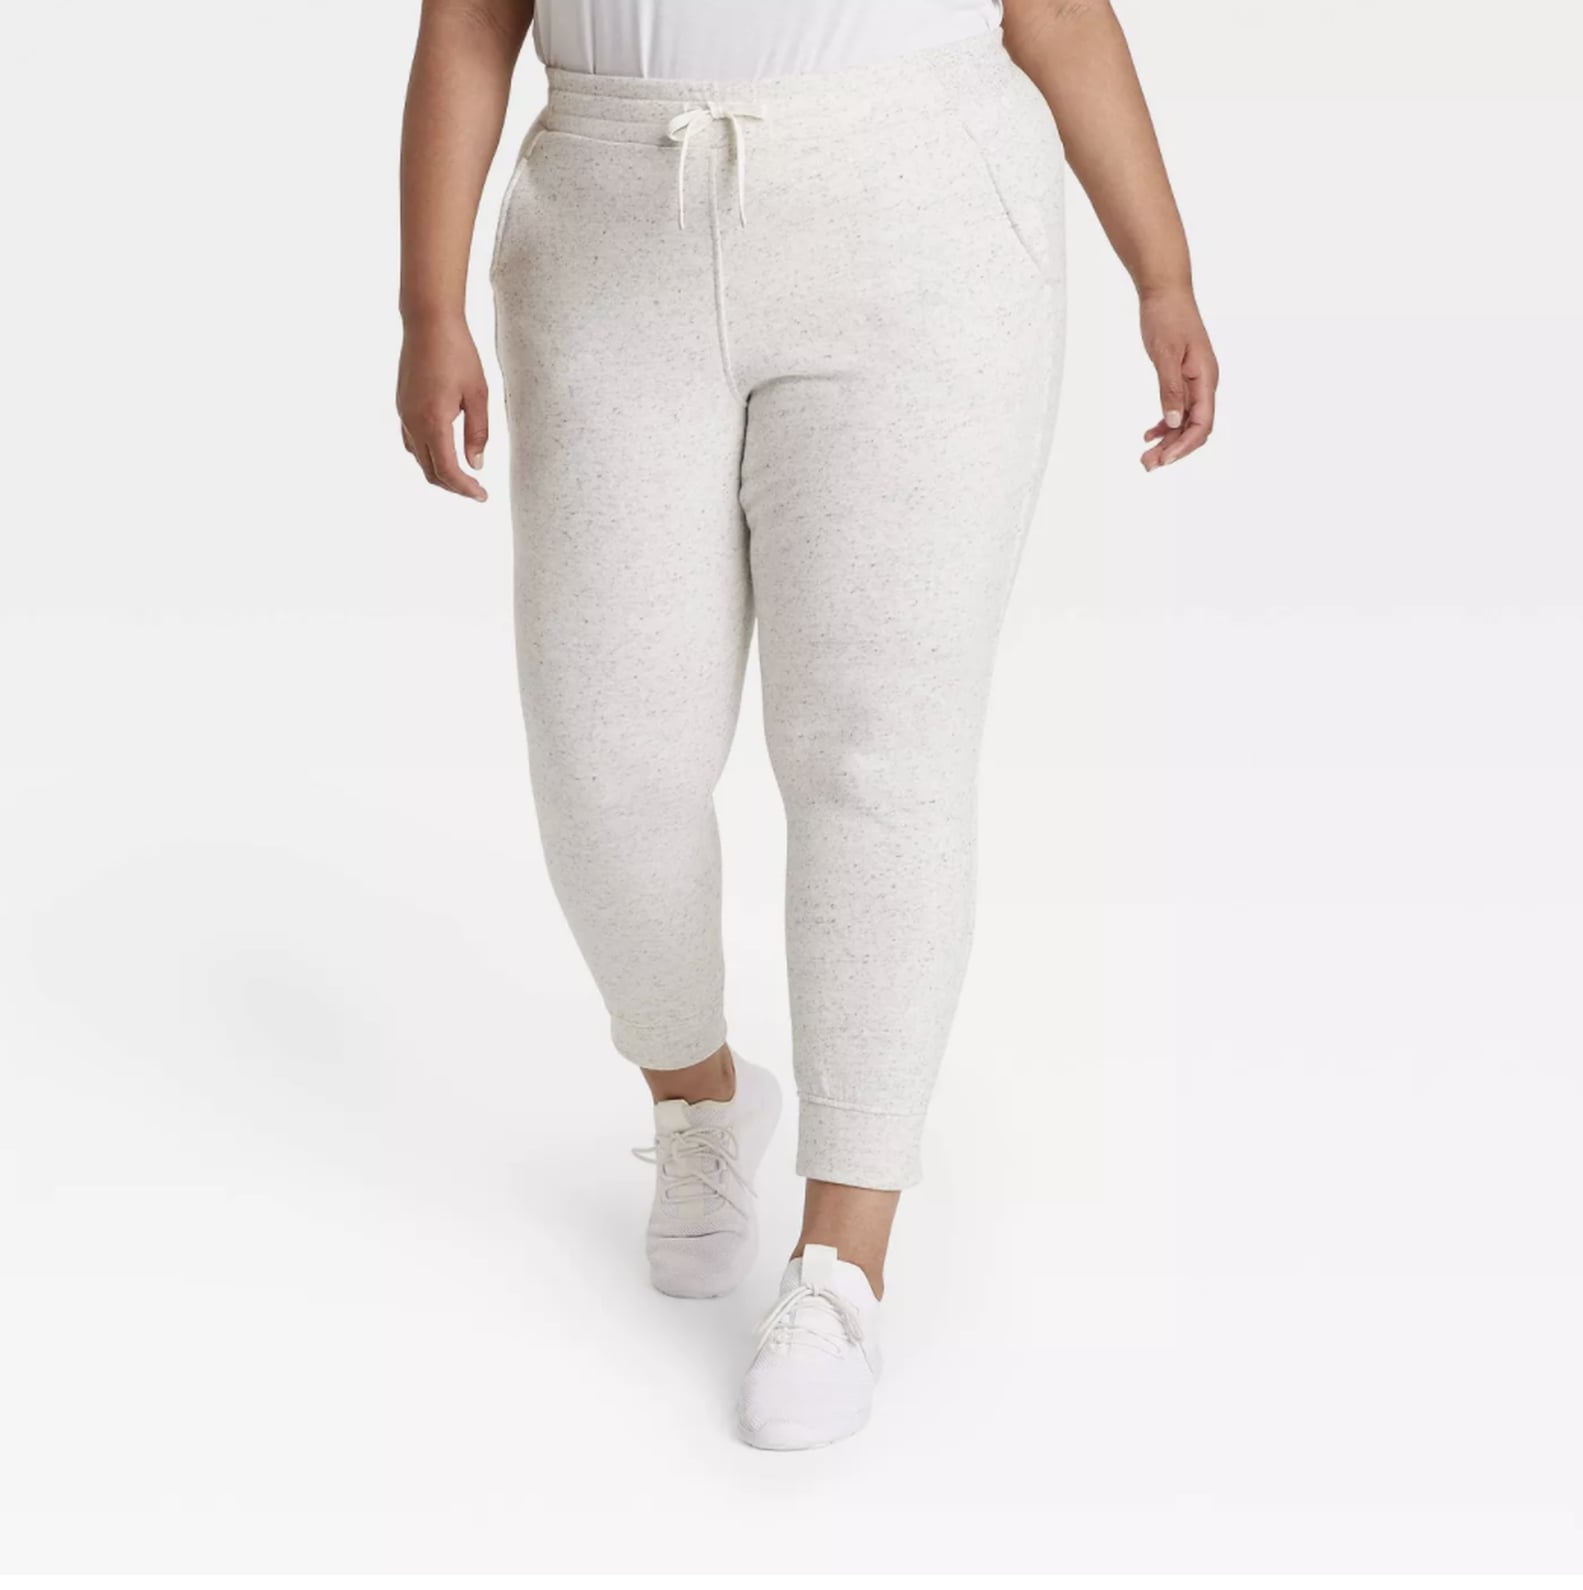 This Activewear Line From Target Is Perfect For Fall | POPSUGAR Fitness